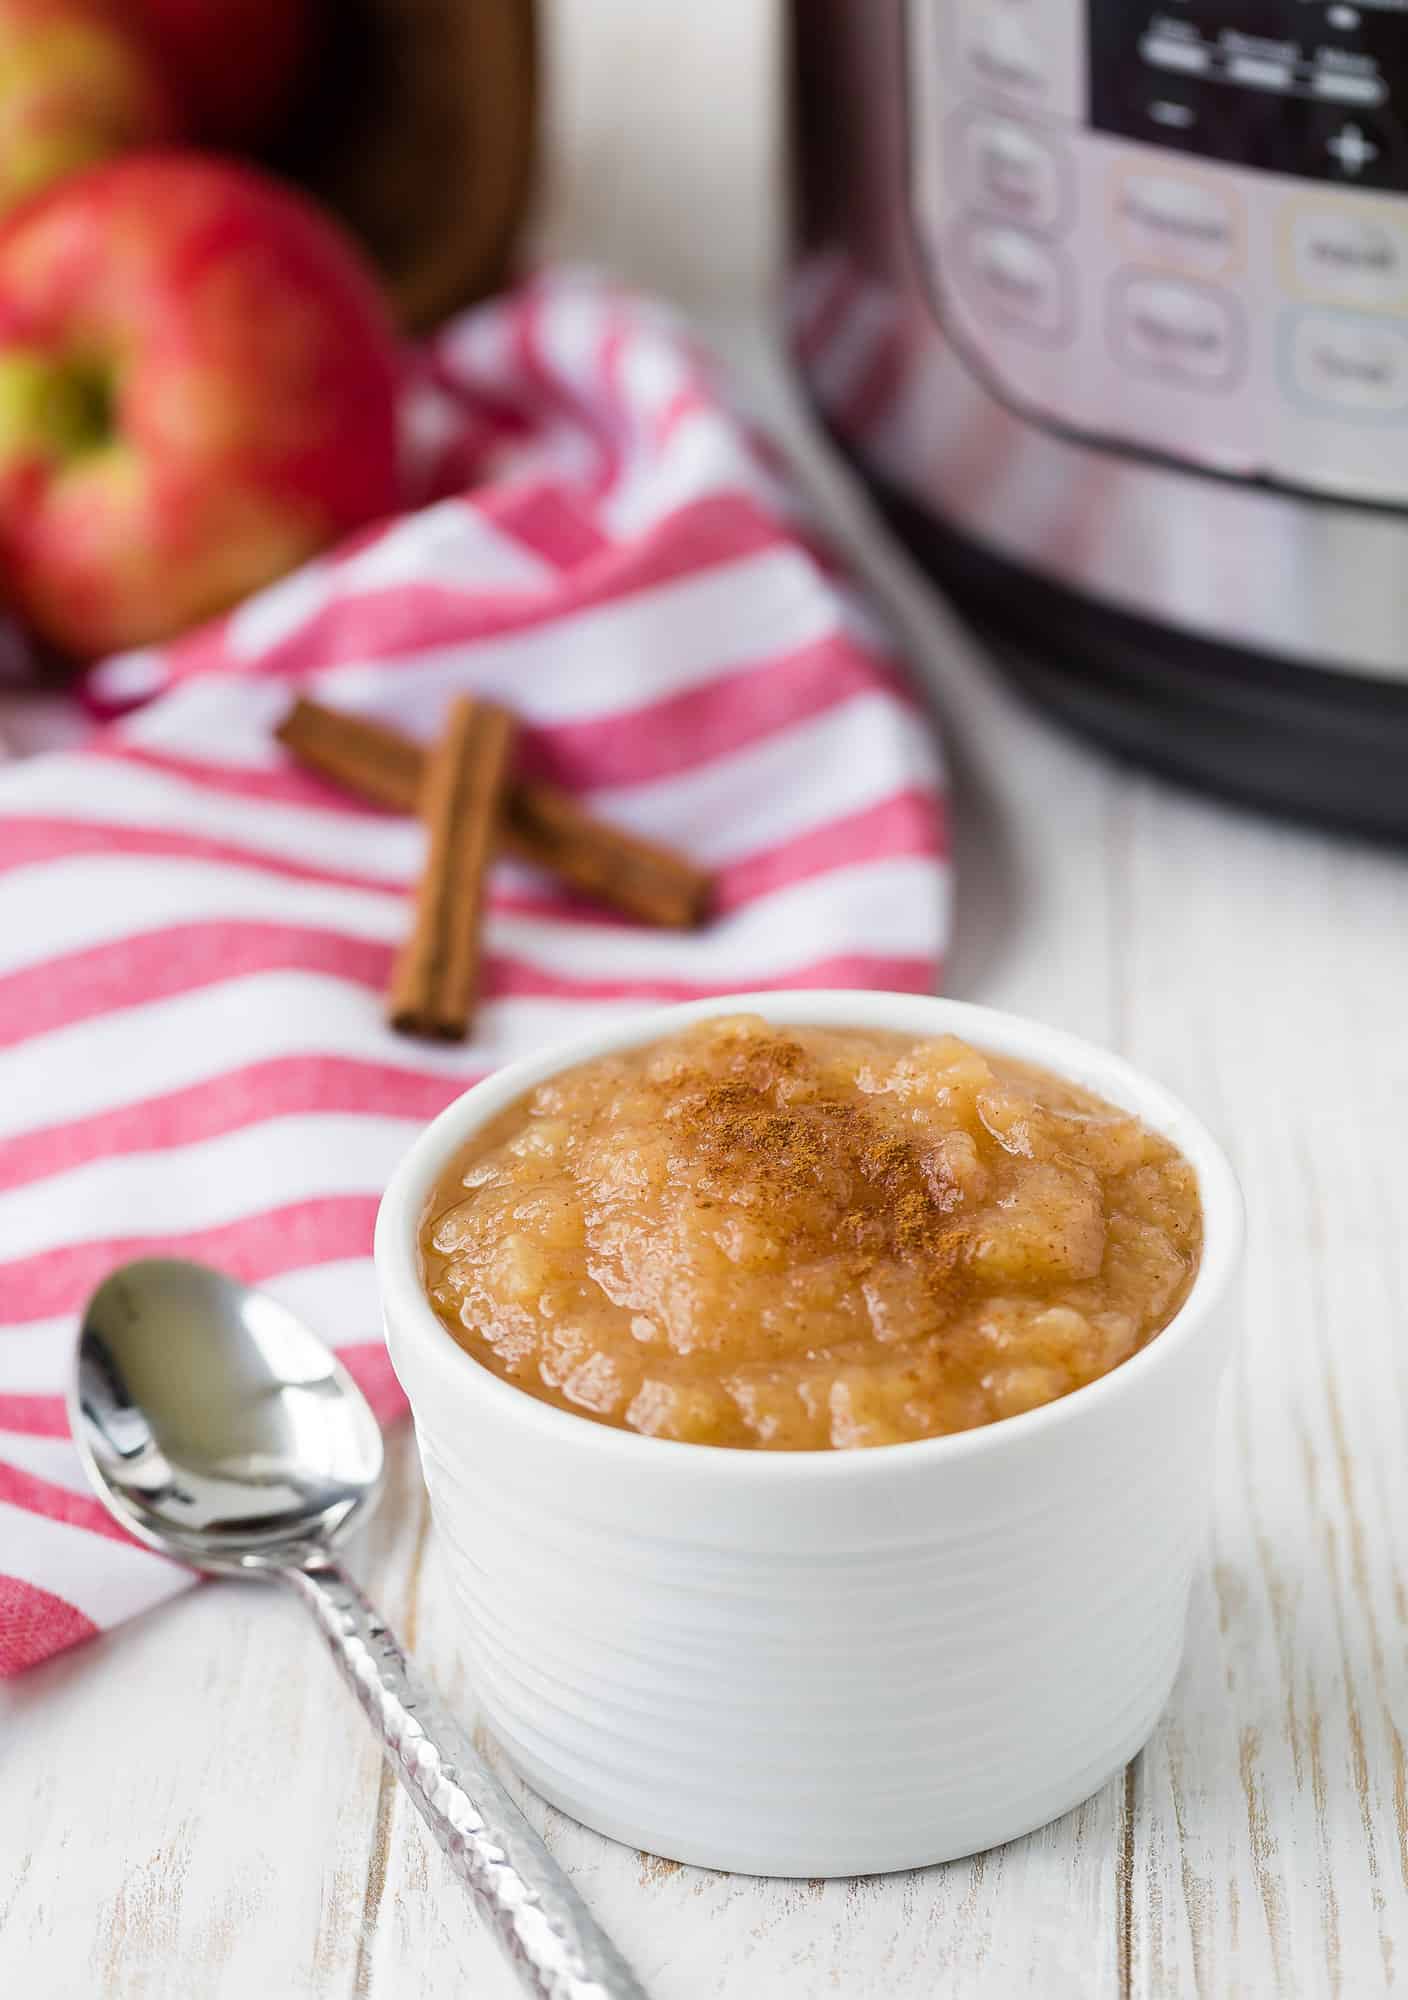 Applesauce in a small bowl, pressure cooker in background.